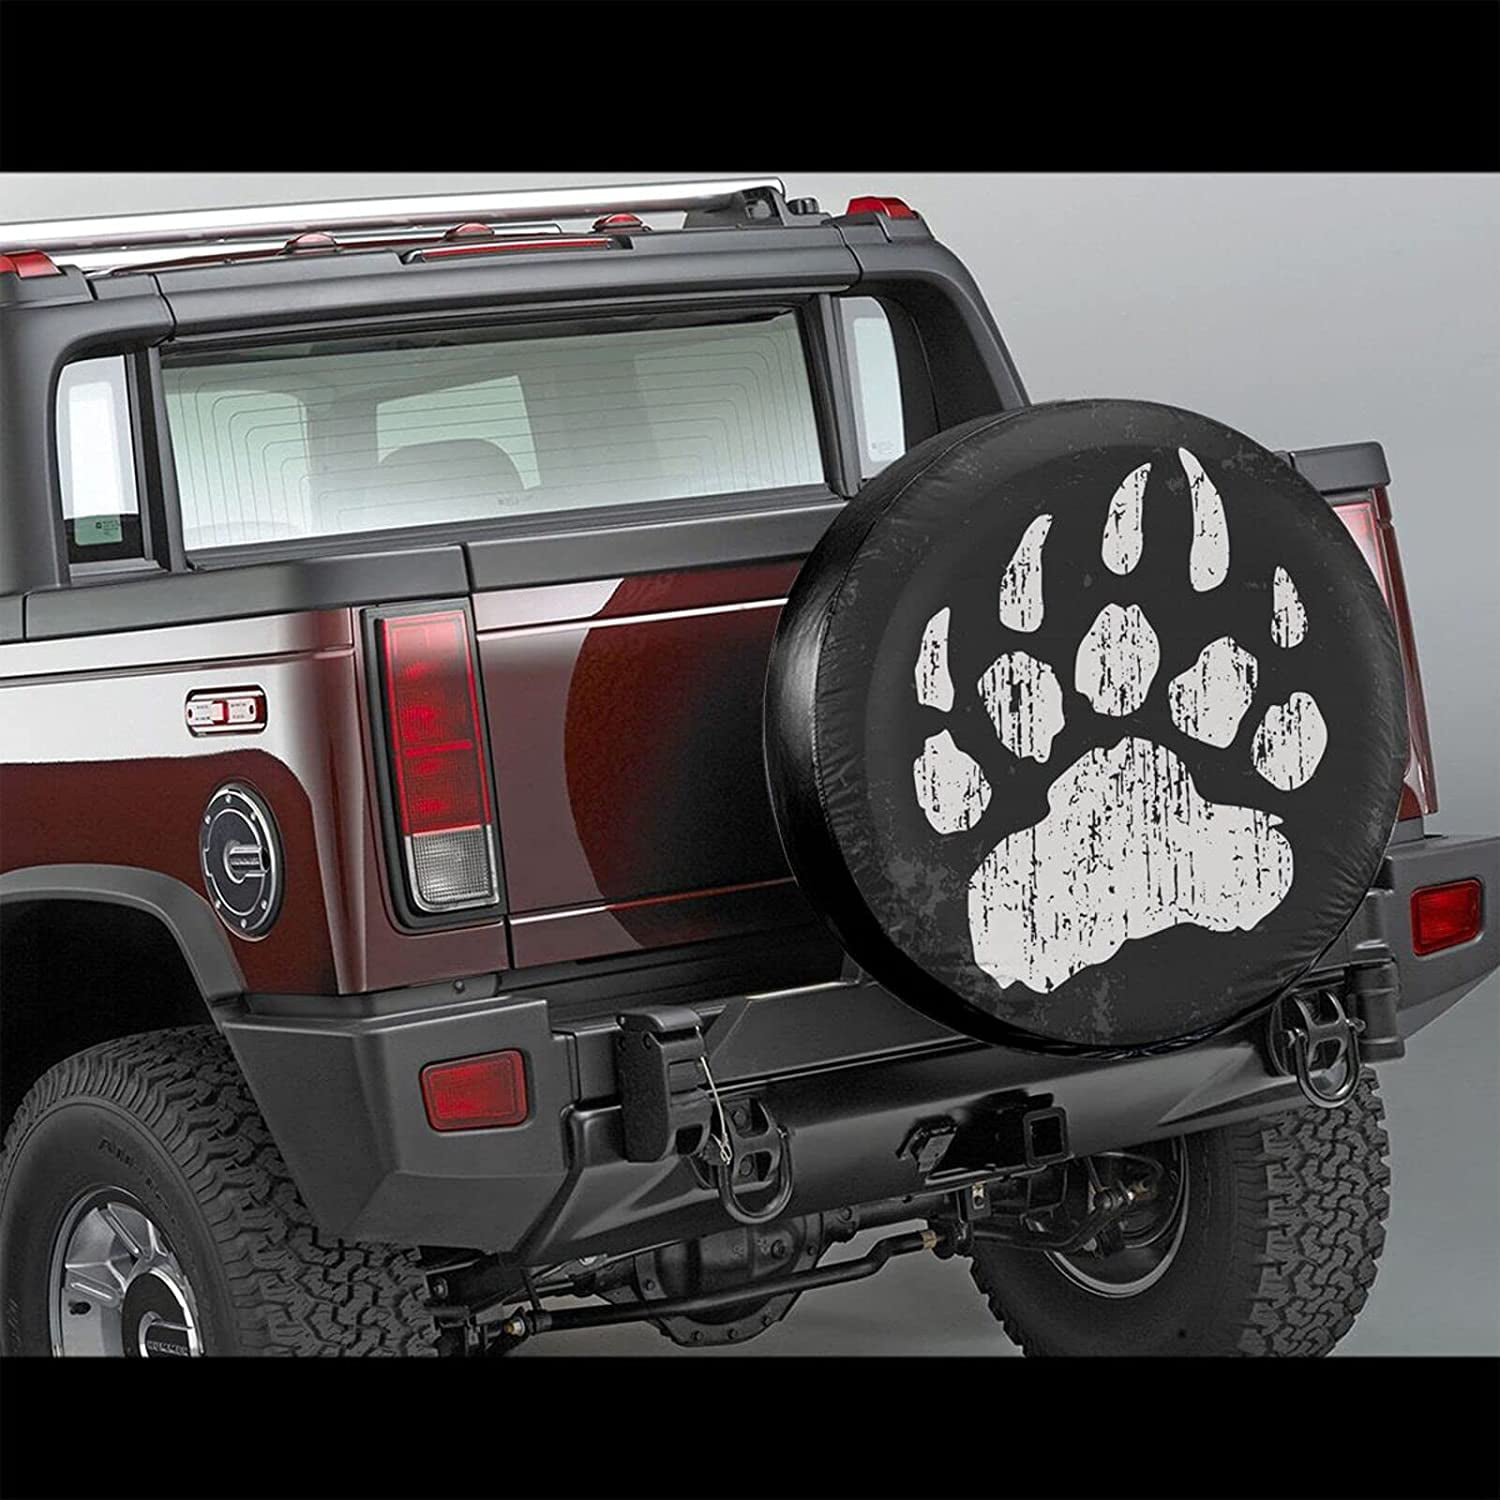 Spare Tire Cover Painting Pug Dog Tire Cover Waterproof UV Protective Wheel Bags Universal Fit for Jeep Wrangler RV SUV Truck Camper Travel Trailer 14 15 16 17 